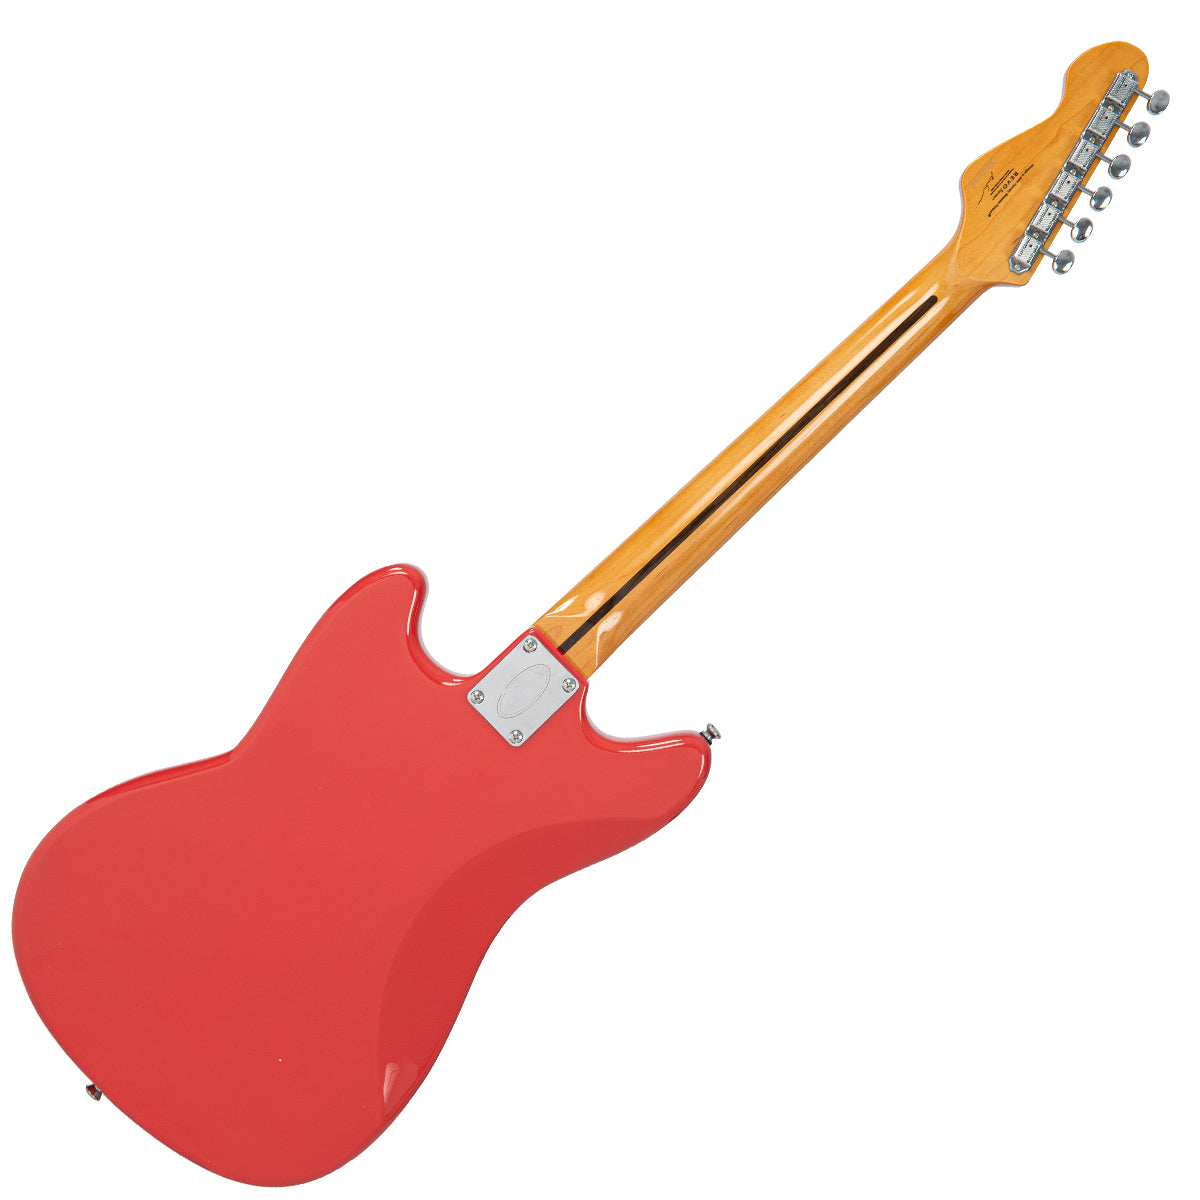 Vintage REVO Series 'Colt' HS Duo Electric Guitar ~ Firenza Red, Electric Guitars for sale at Richards Guitars.